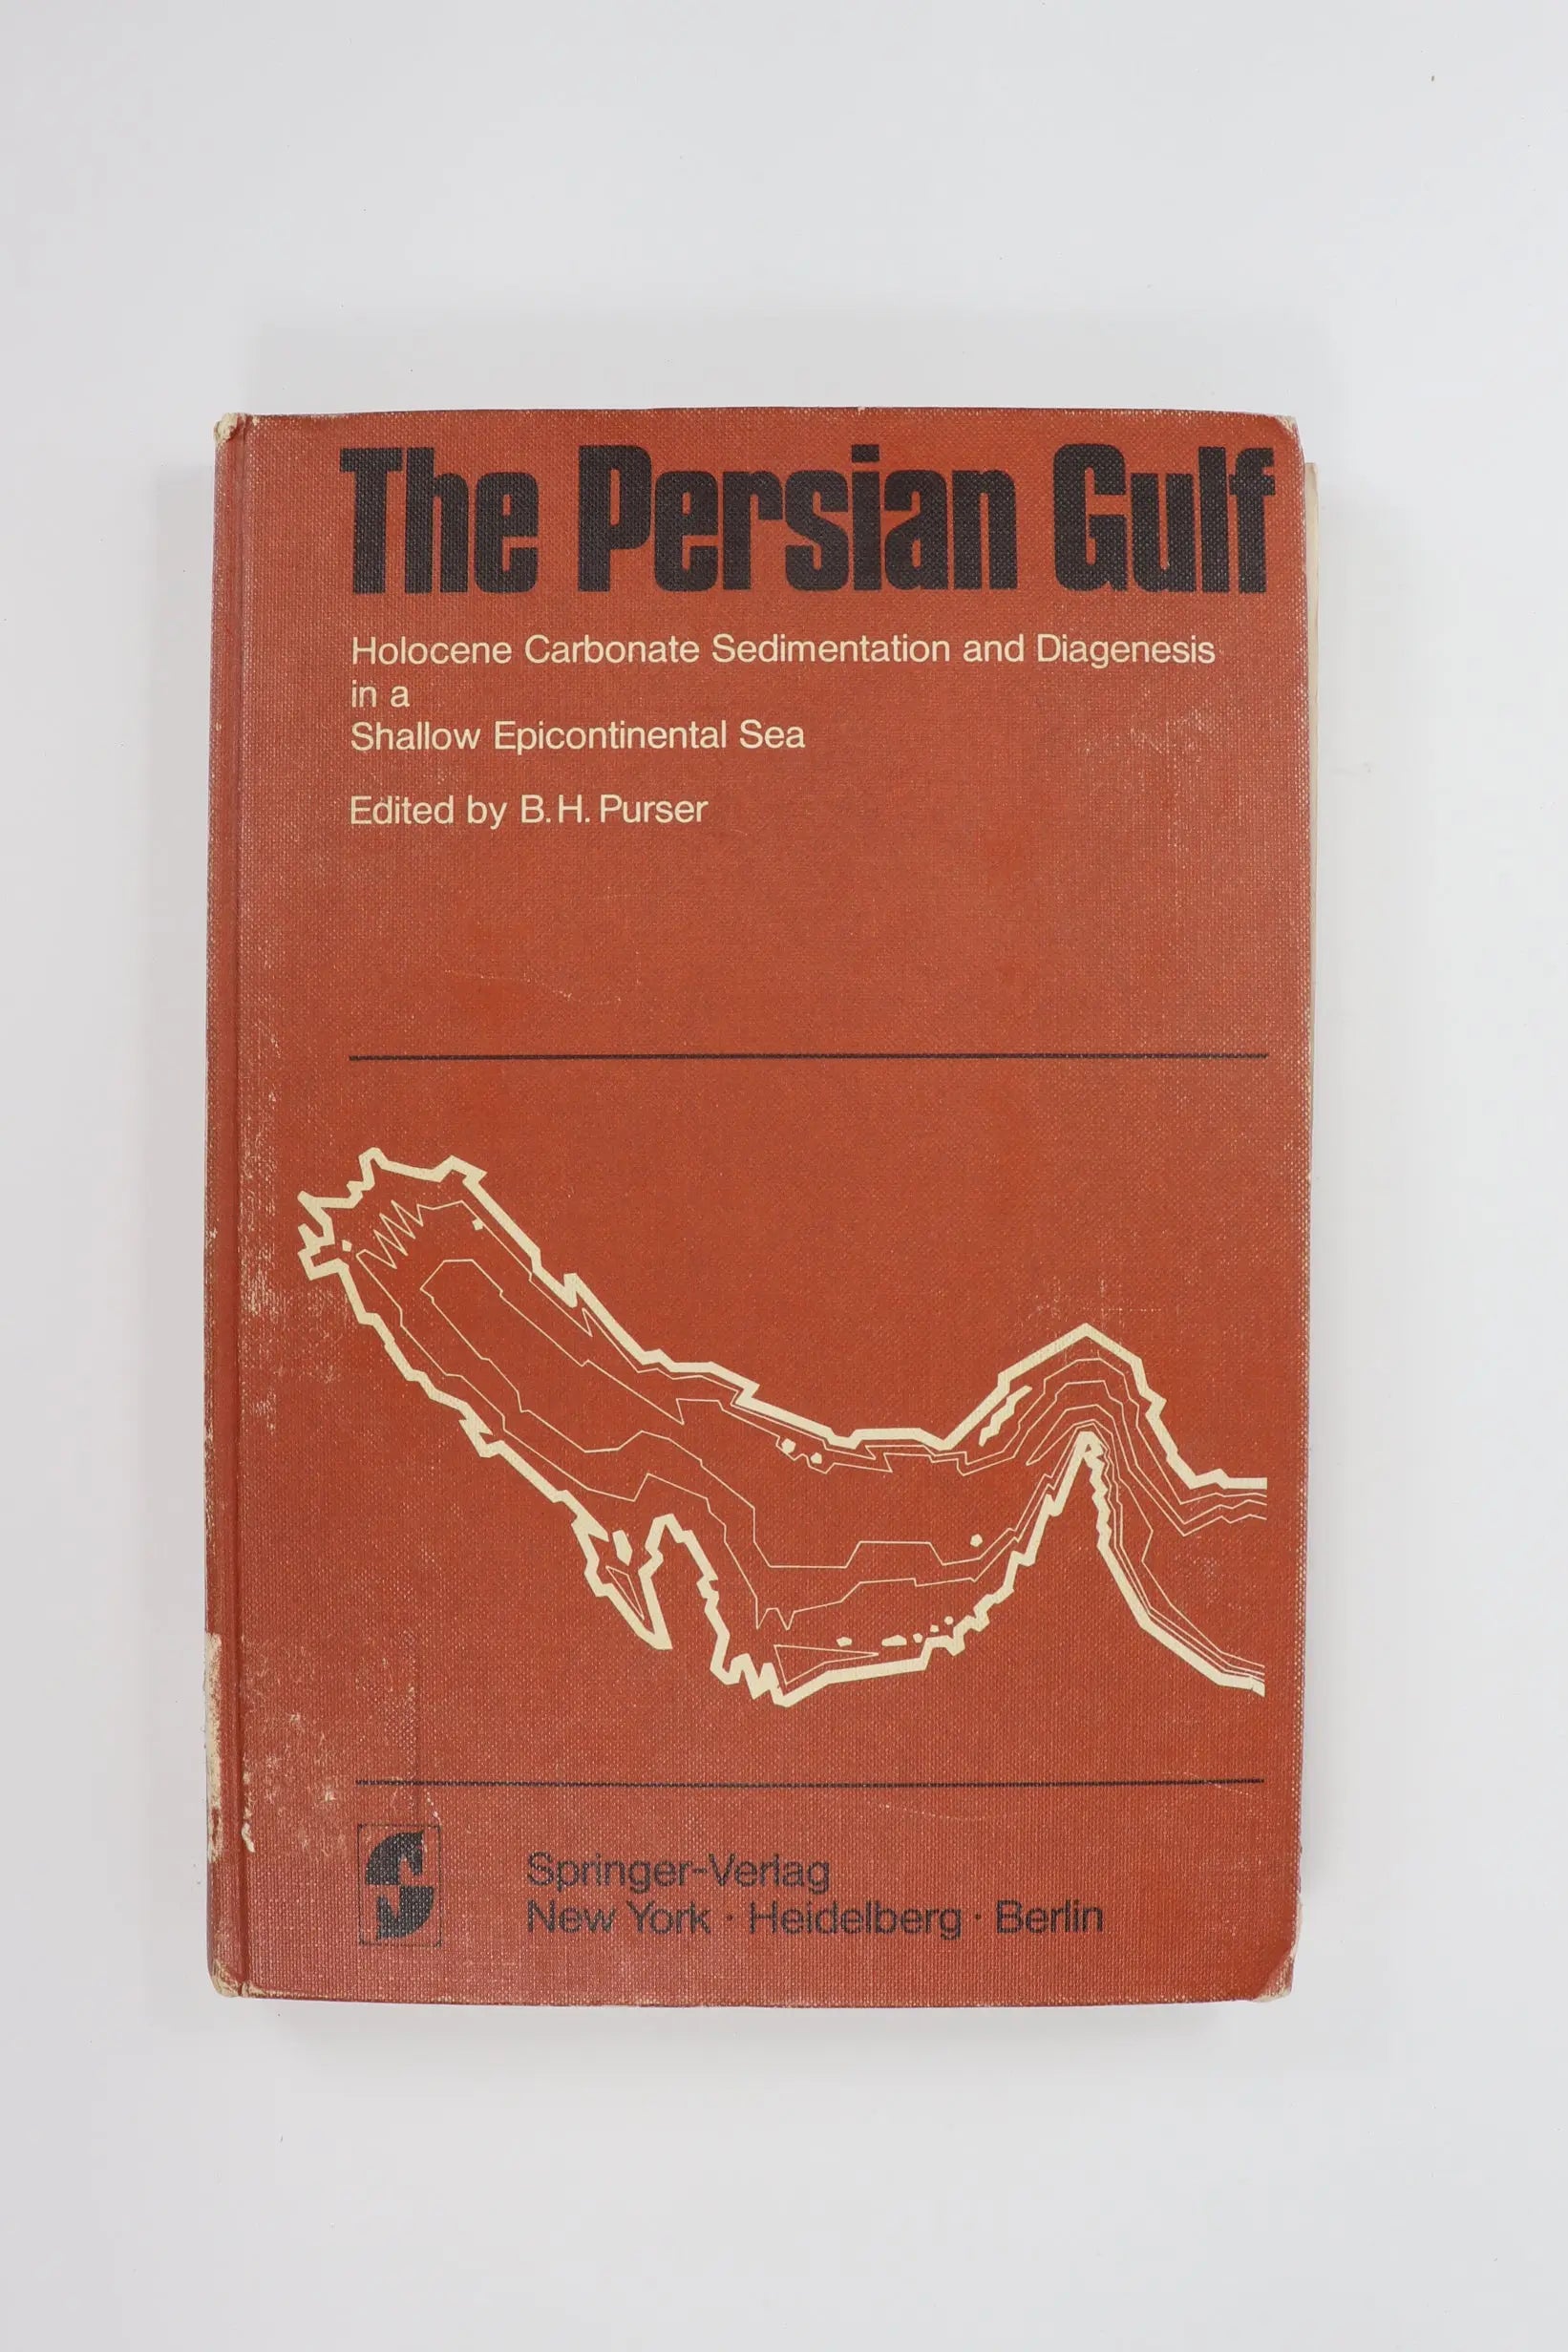 The Persian Gulf - THE STEMCELL SCIENCE SHOP